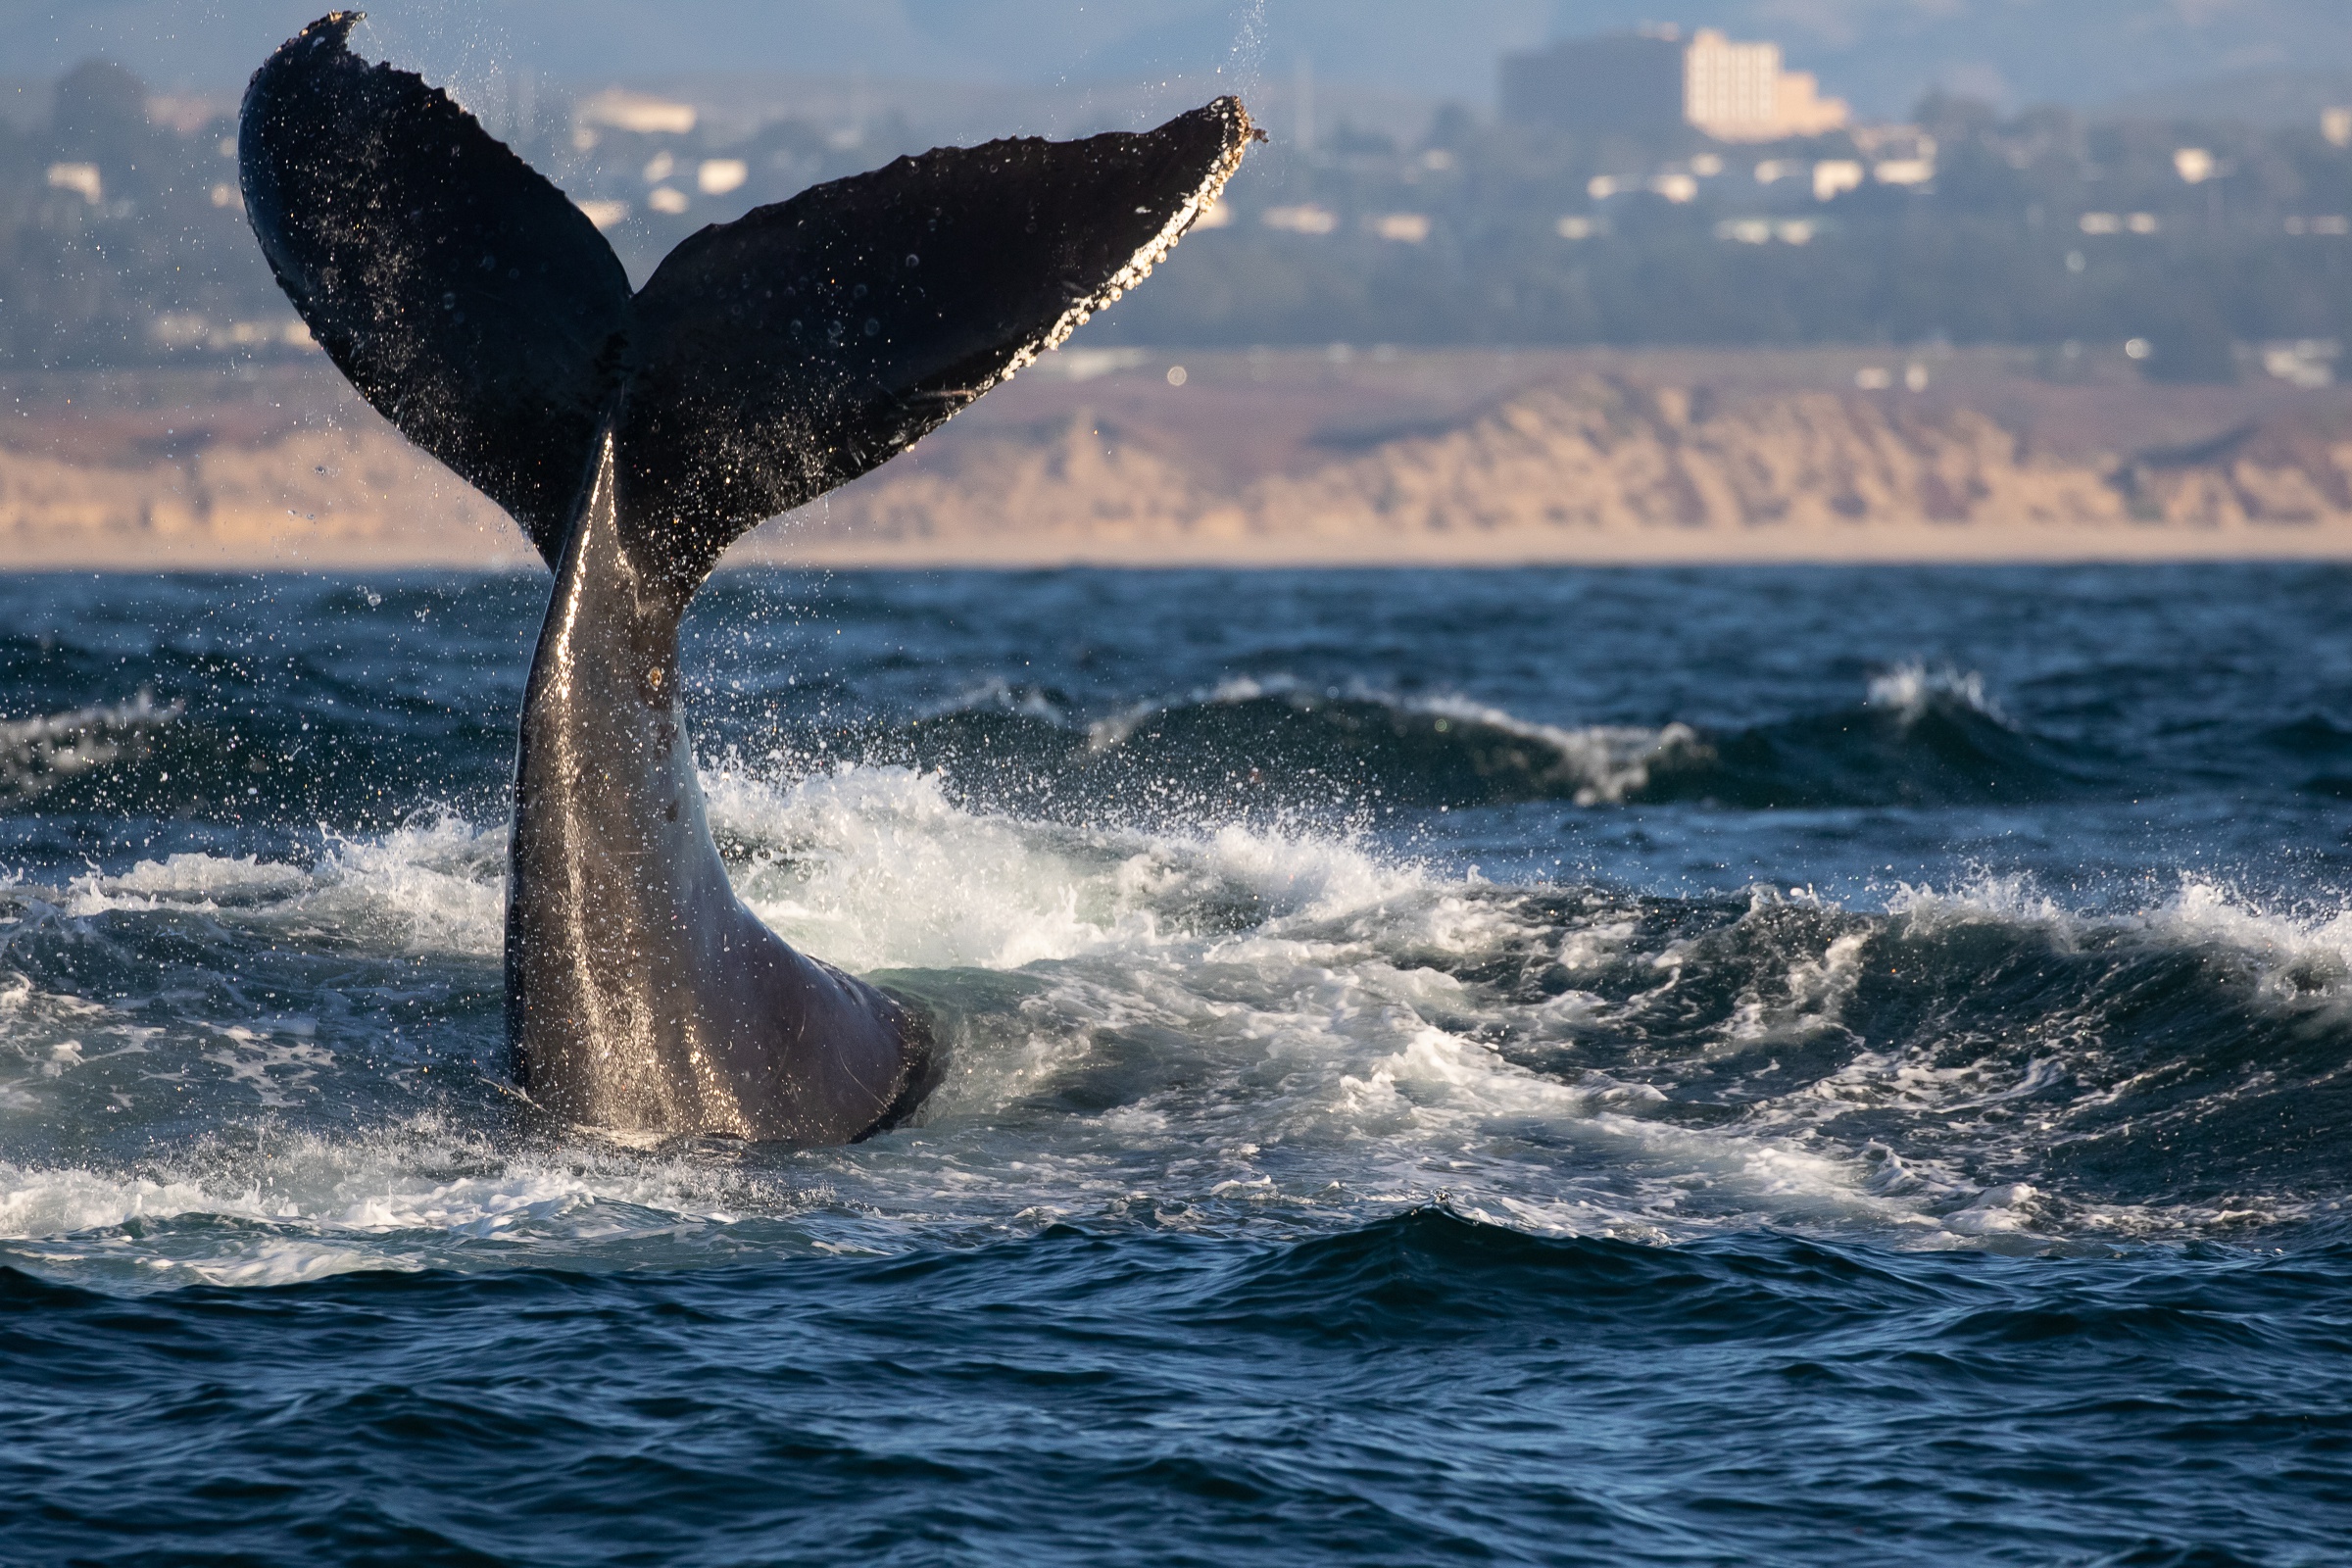 General 2400x1600 sea nature animals whale